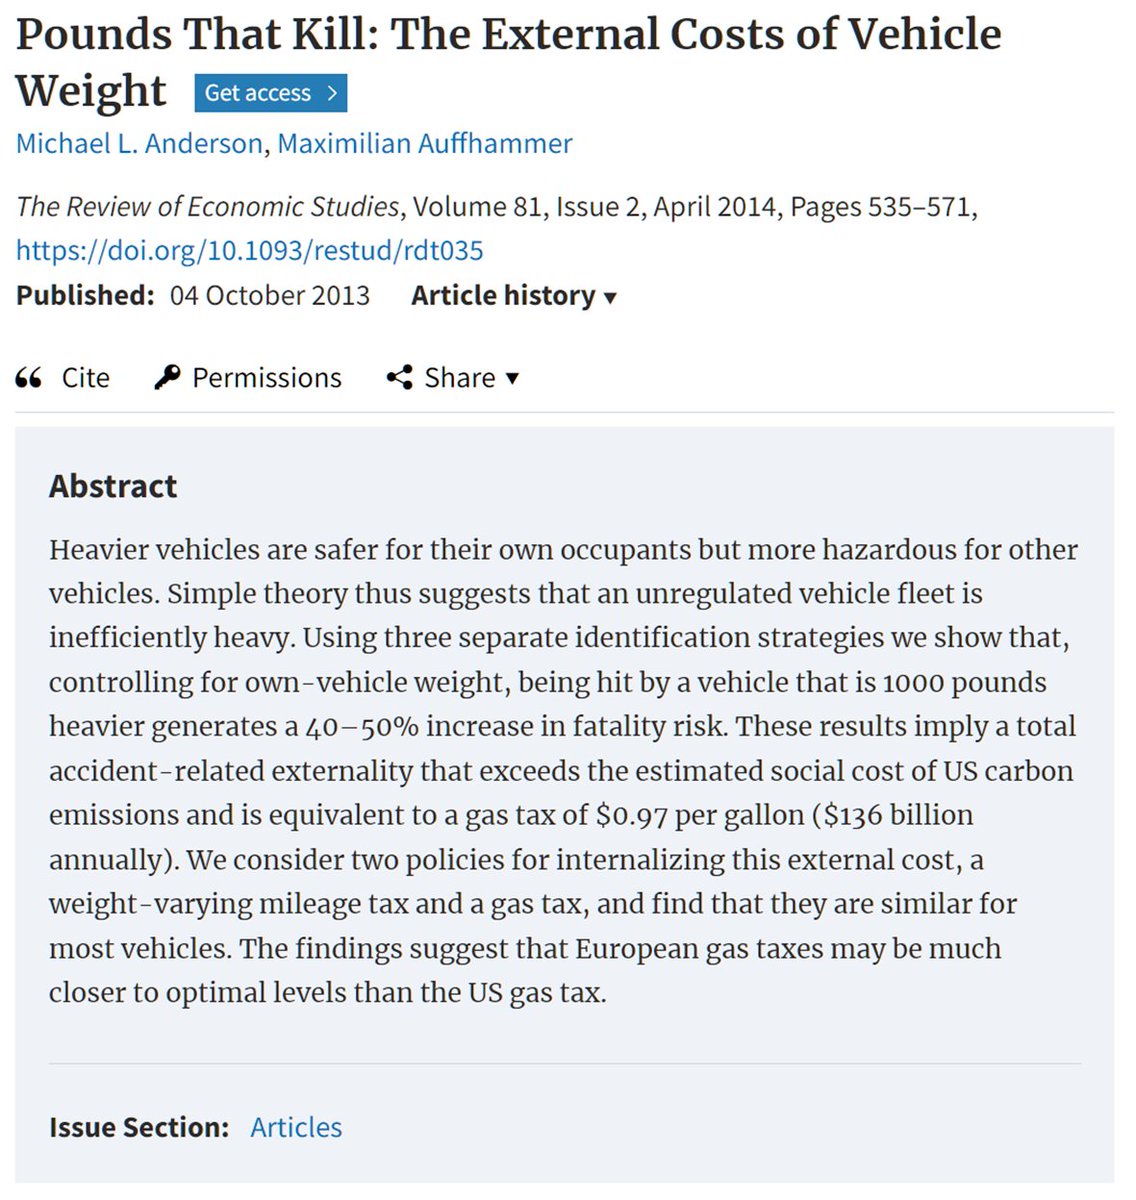 Lightweighting is good! Bikes are even better!But the article only talks about fatalities in vehicle to vehicle collisions which is a small portion of accidents.It's also pre-EV (from 2012). EVs are built very differently. So you can't generalize. https://doi.org/10.1016/j.ecotra.2021.100219